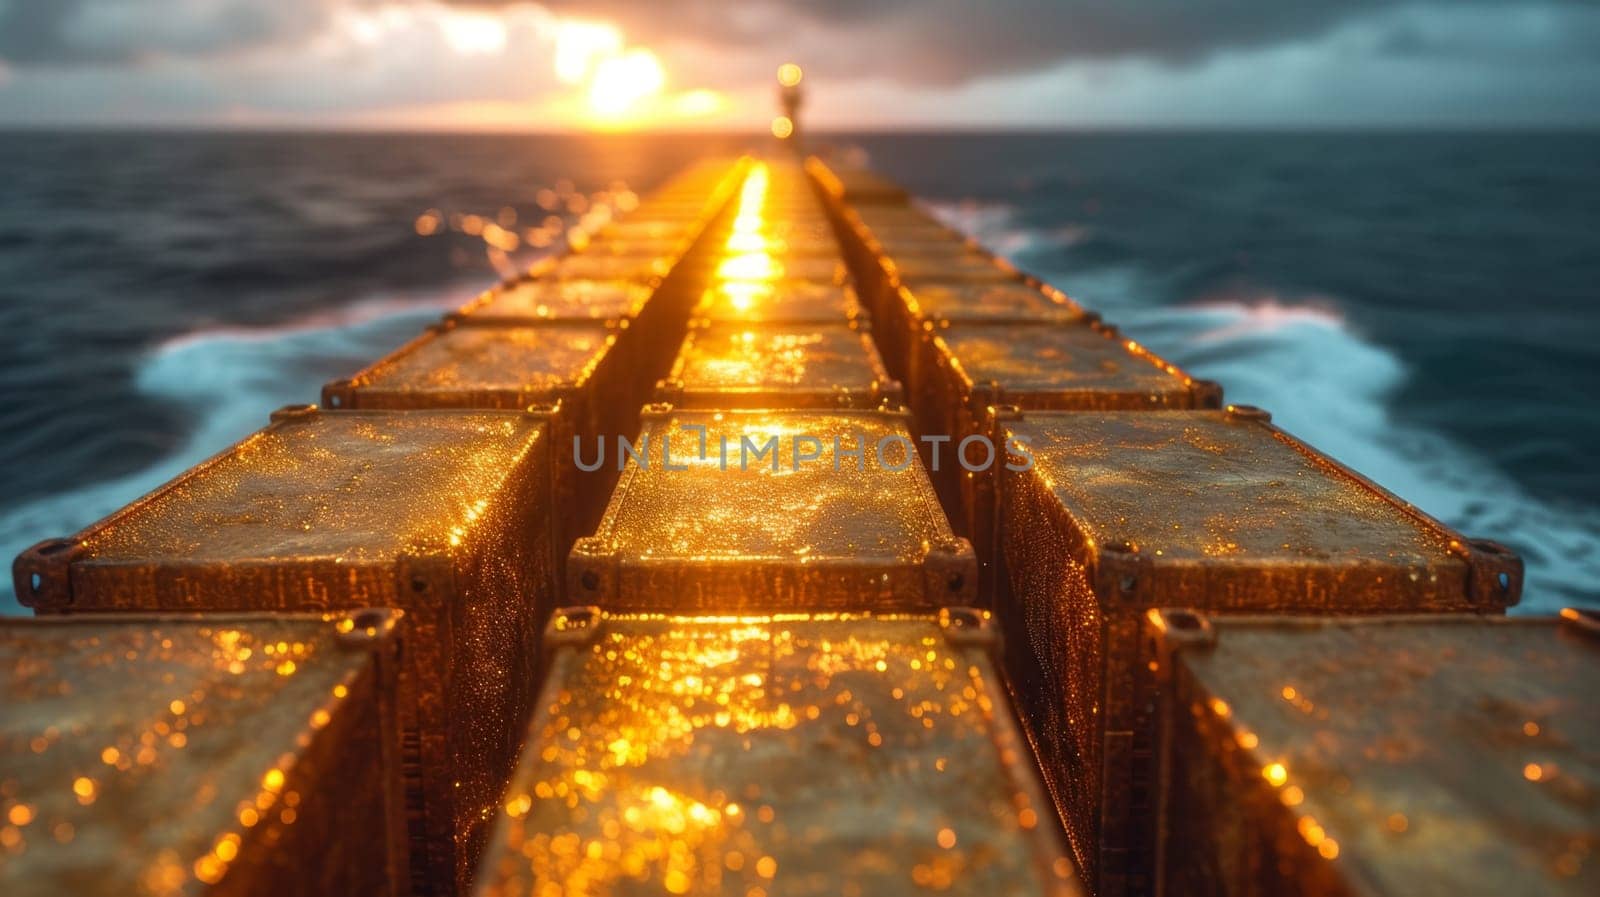 Gold containers with cargo on a container ship in the ocean at sunset.